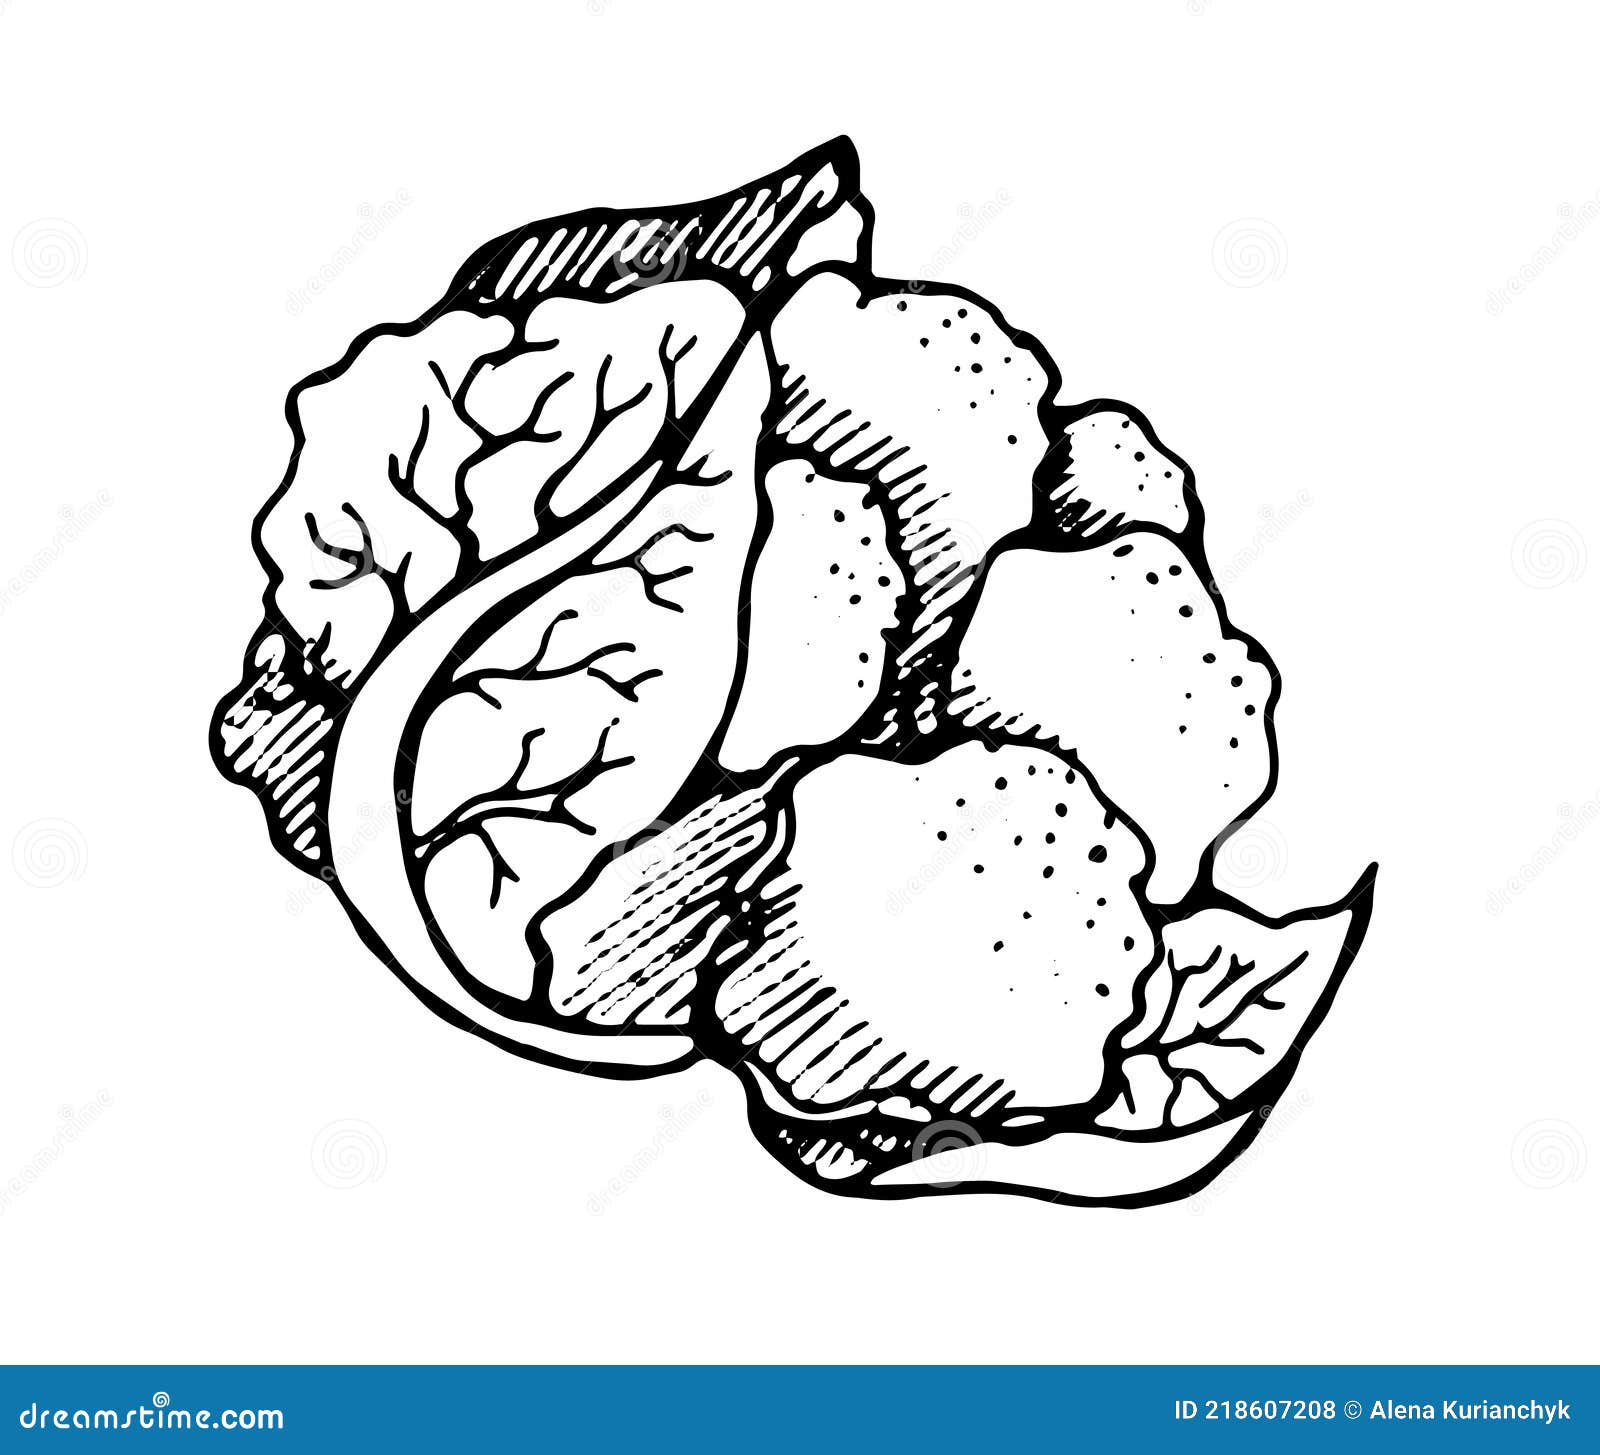 How to Draw Cauliflower🥦| Vegetable drawing for Kids | Cauliflower Art for  Kids | Art Gallery - YouTube